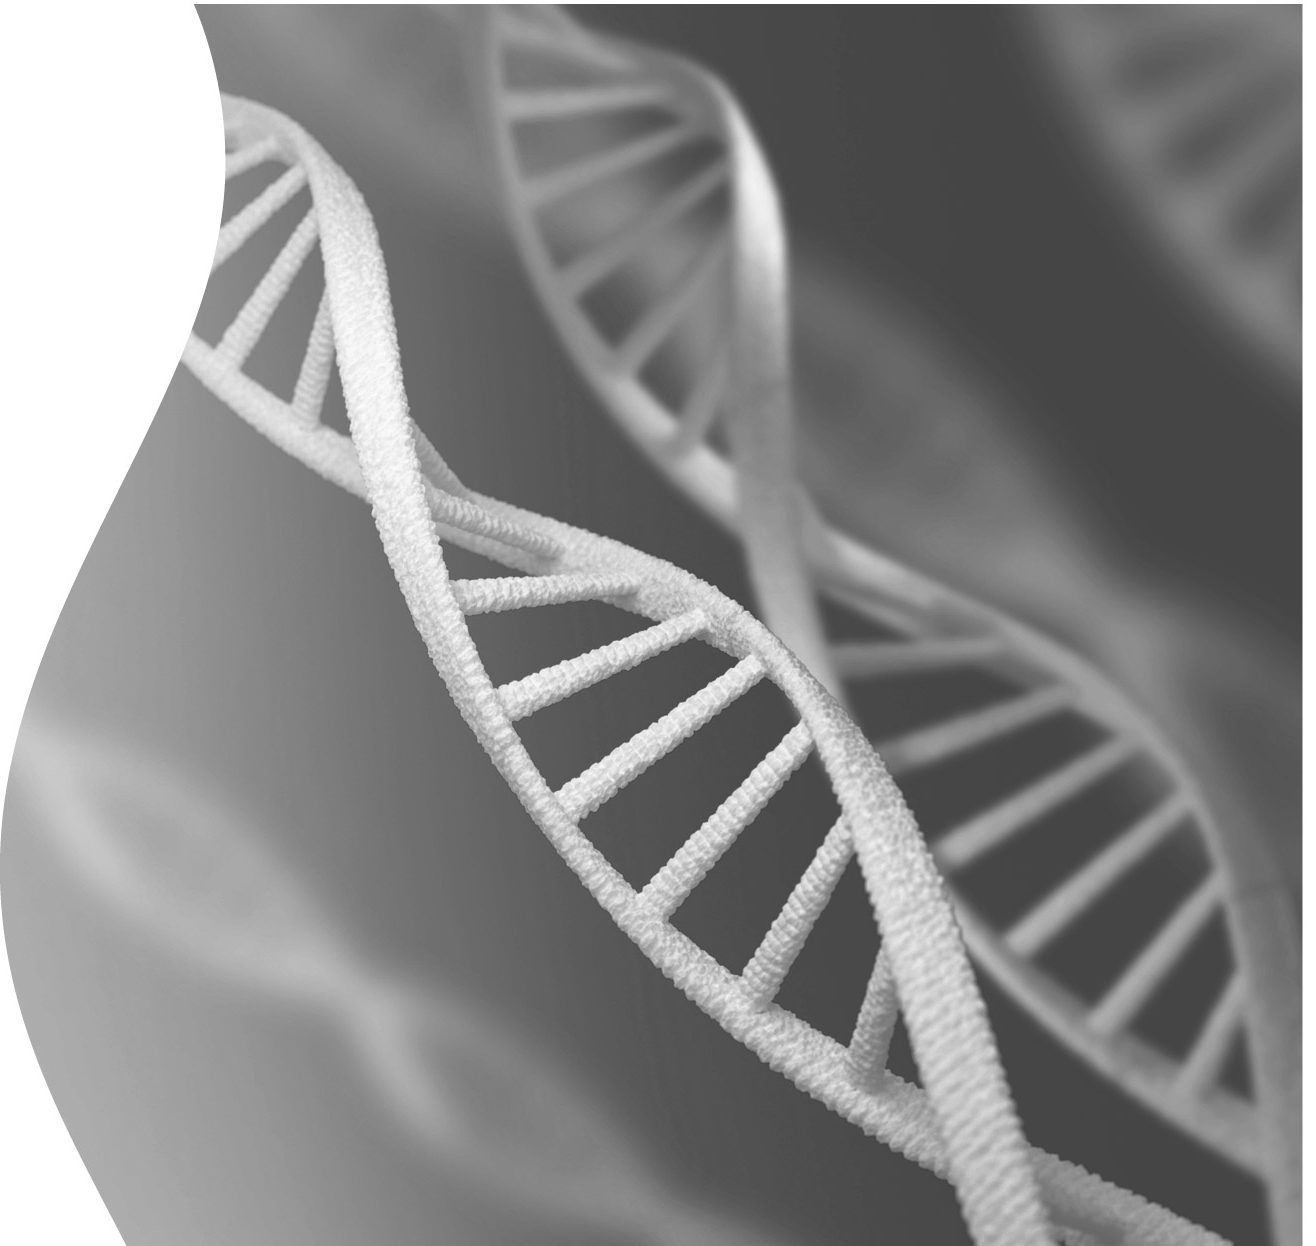 Syngoi Linear Synthetic DNA Manufacturing